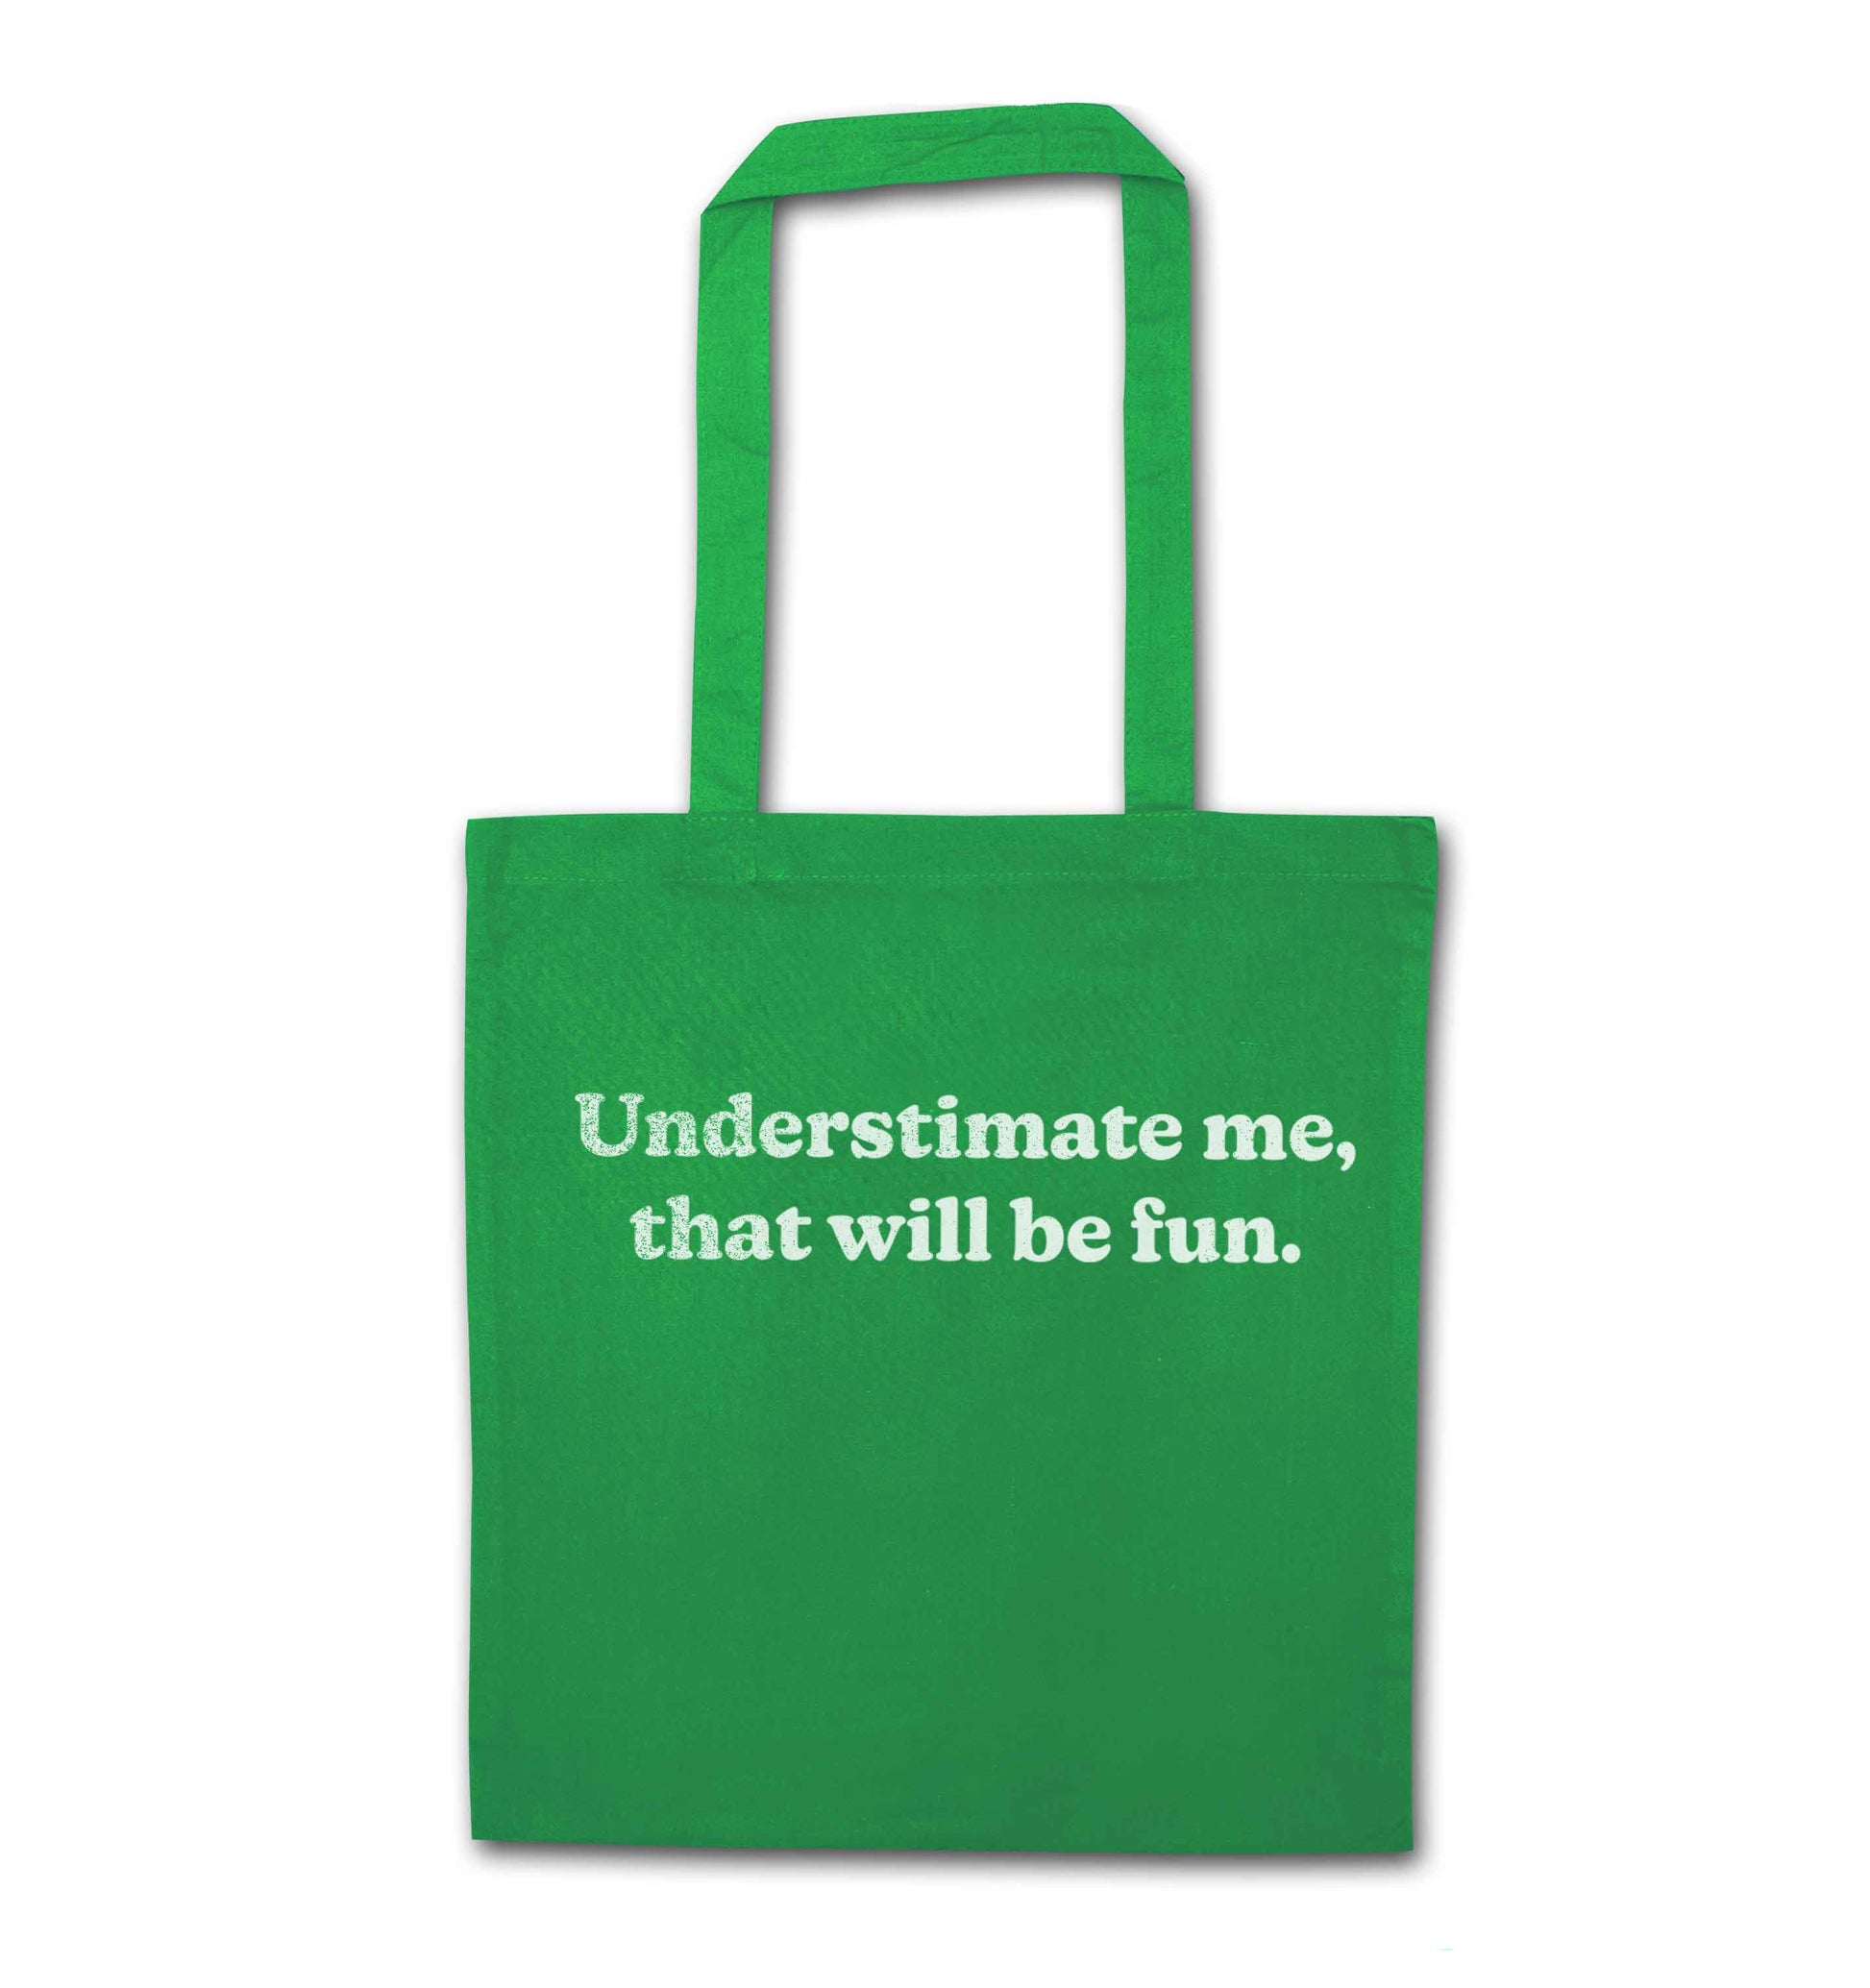 Underestimate me that will be fun green tote bag